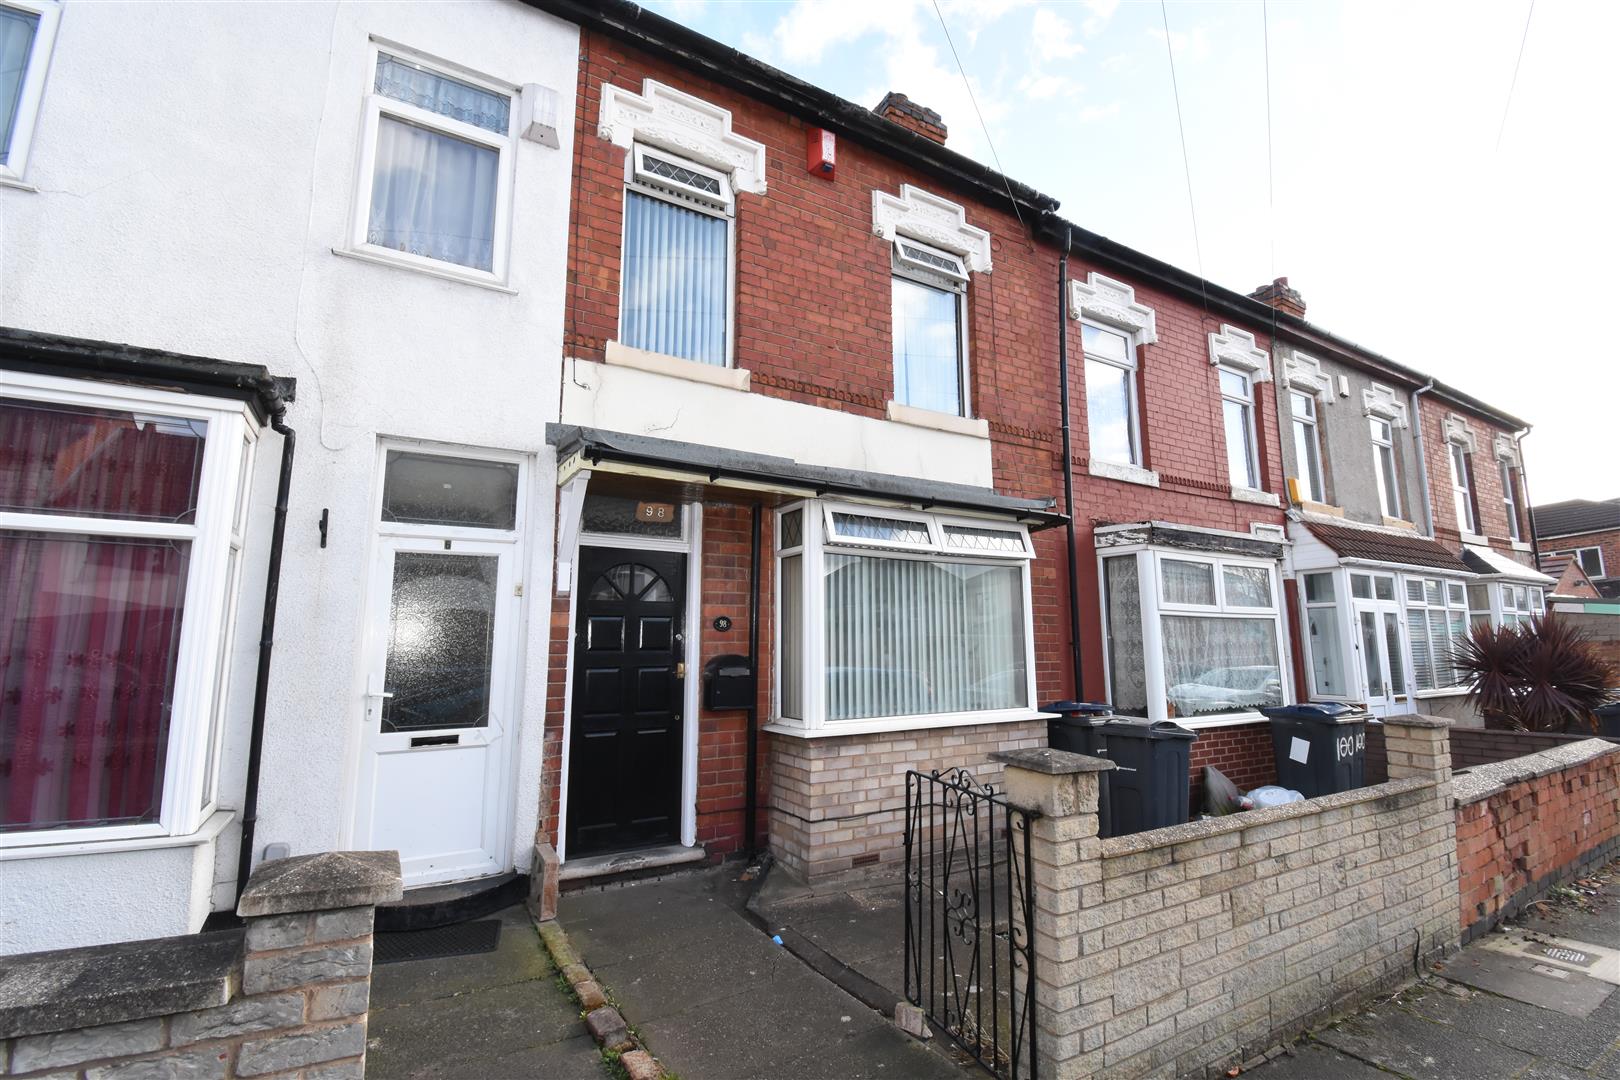 2 bed house for sale in Bamville Road, Ward End, Birmingham, B8